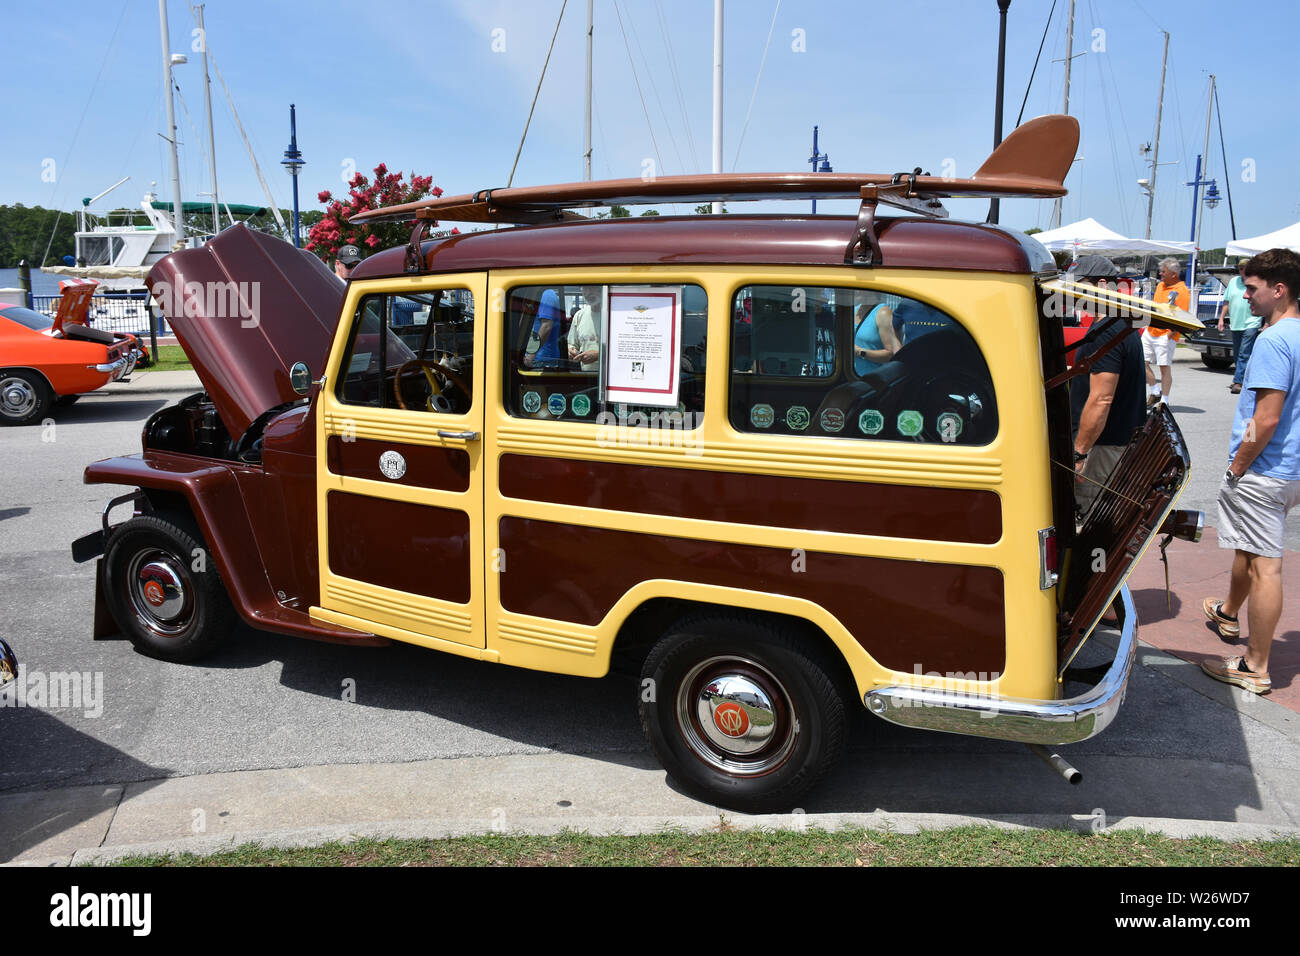 A Vintage Willys Overland station wagon on display at a car show. Stock Photo